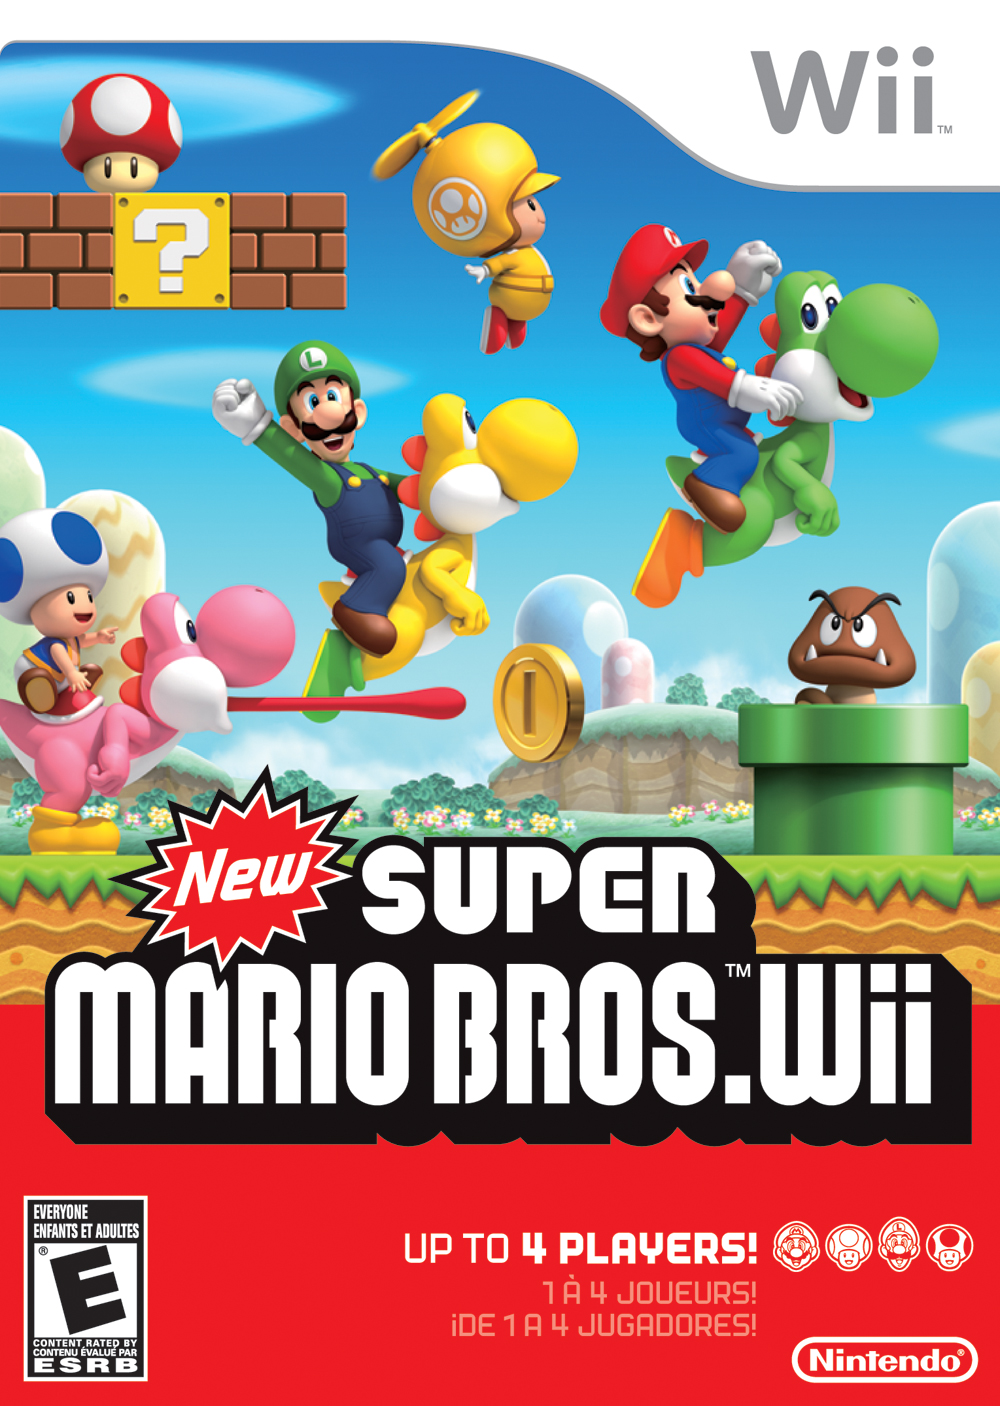 new-super-mario-bros-wii-strategywiki-the-video-game-walkthrough-and-strategy-guide-wiki